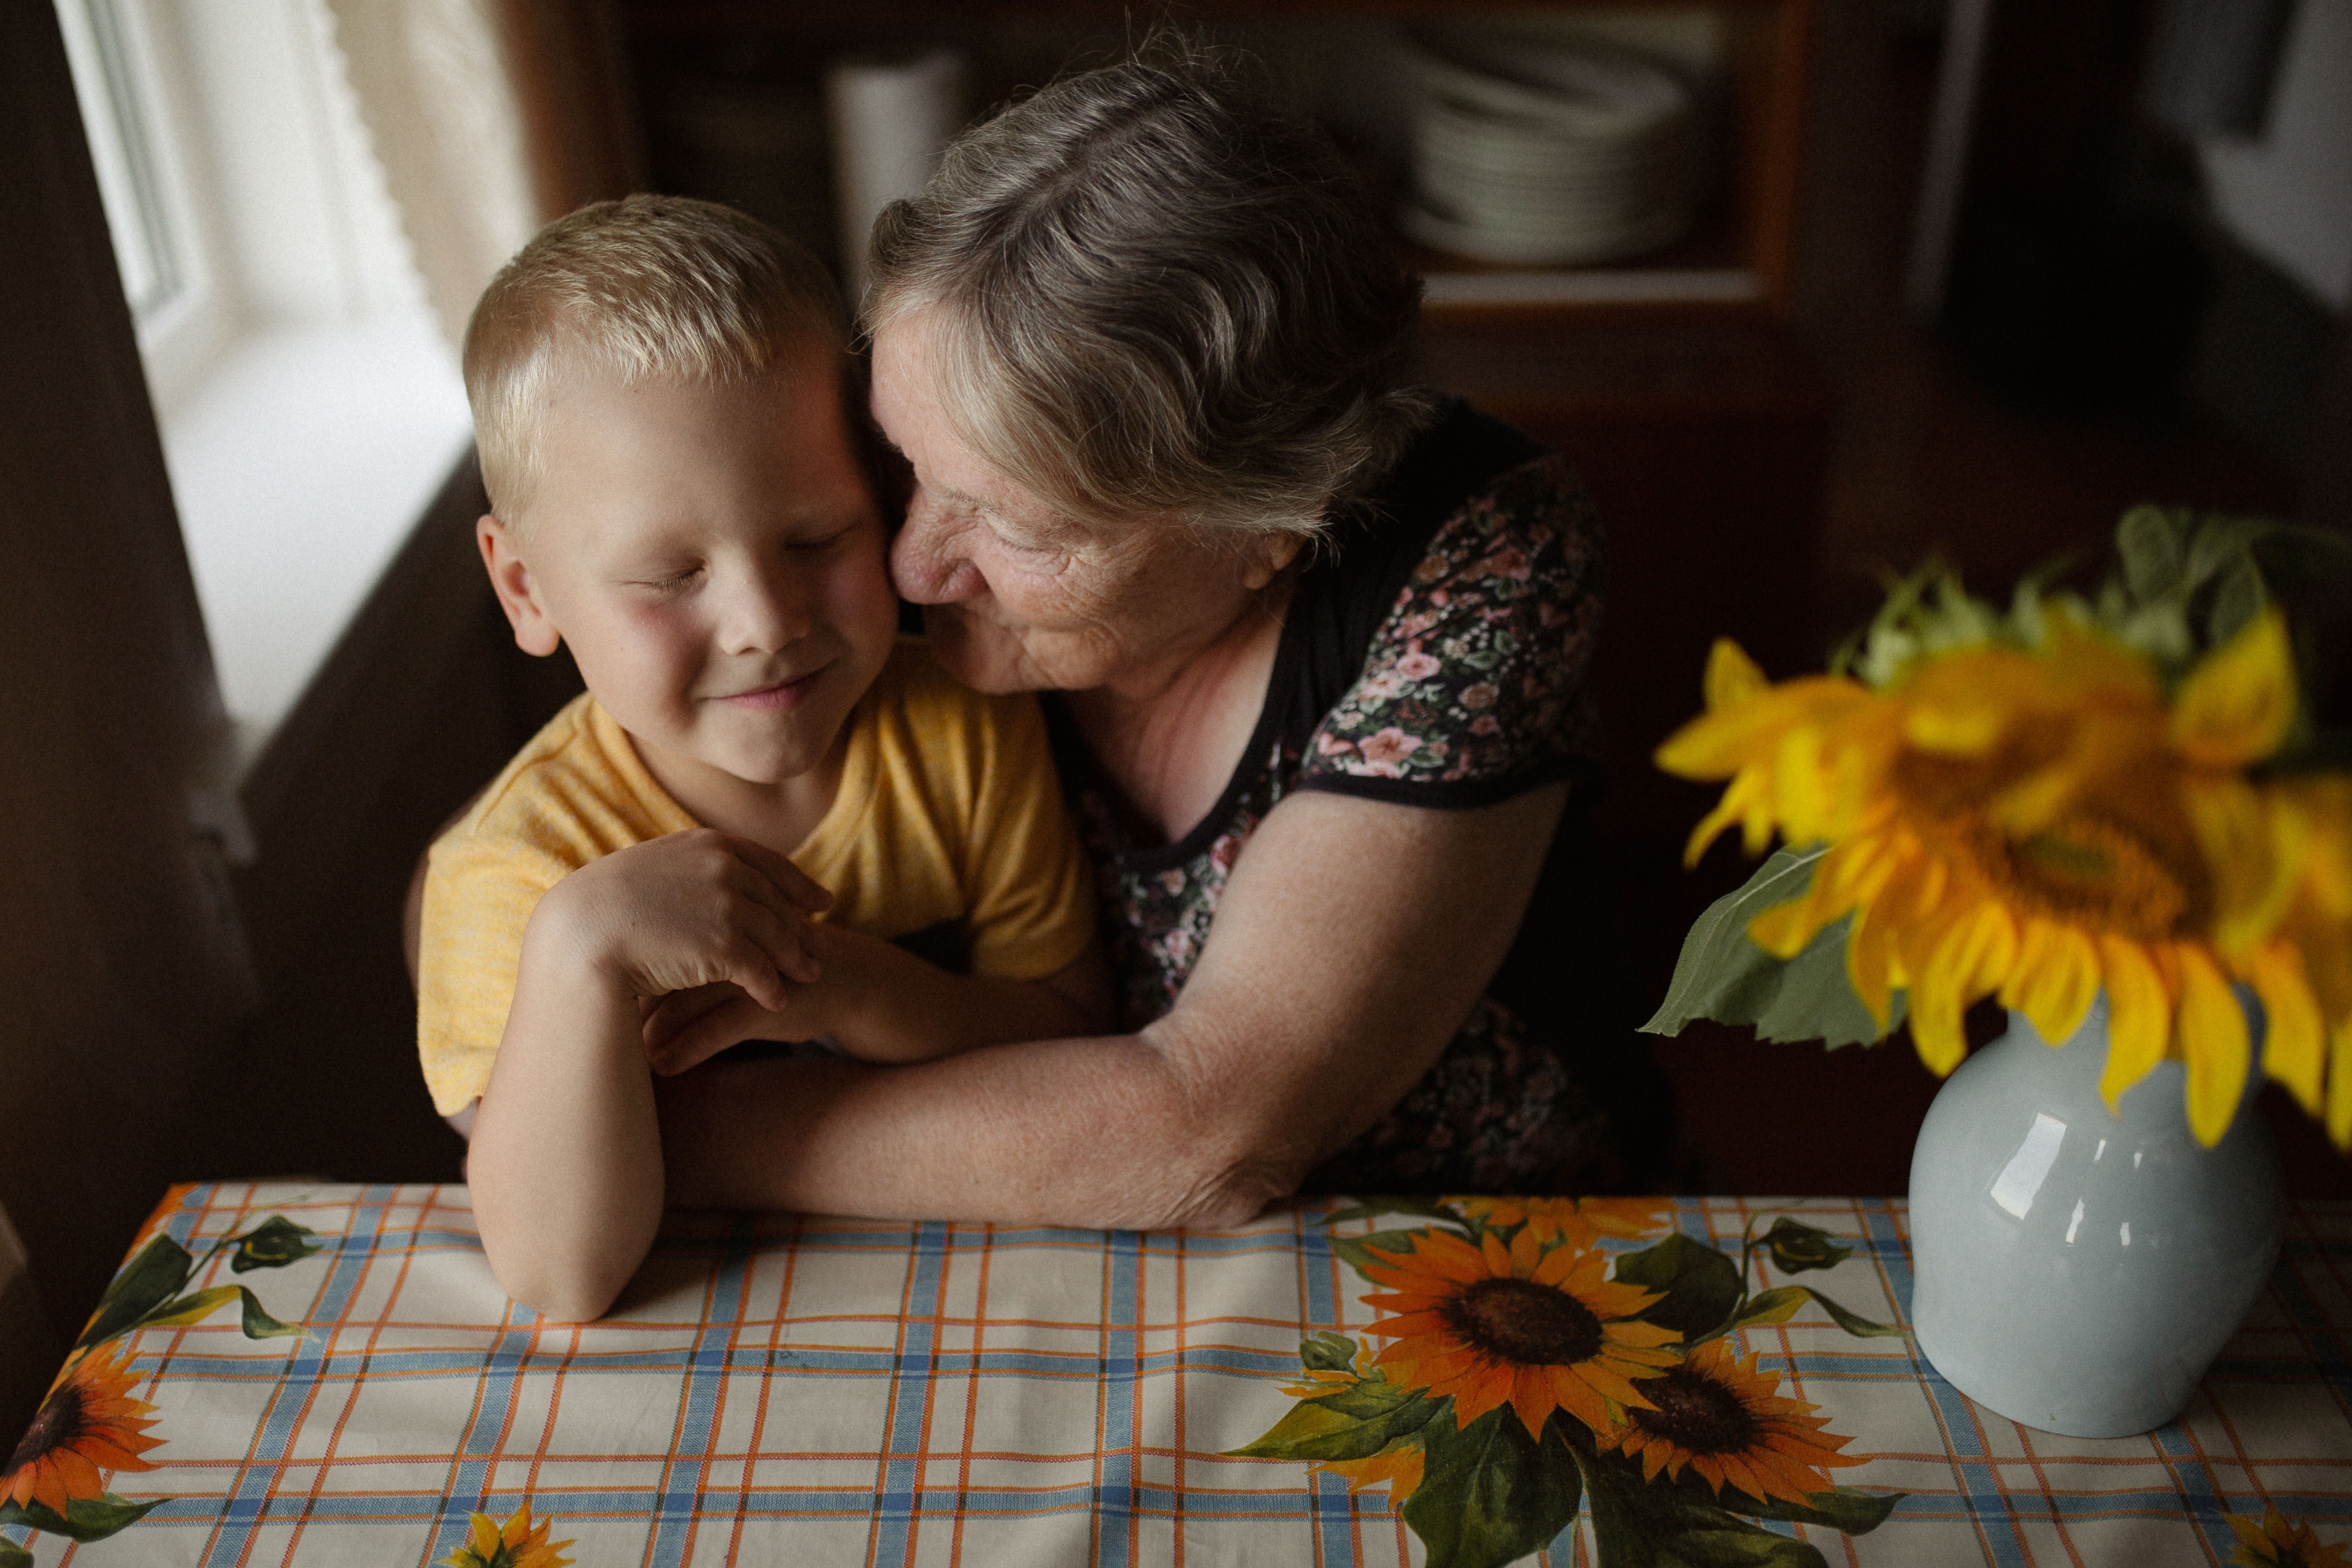 Mrs. Smith discovered that Atlas was her grandson | Photo: Pexels